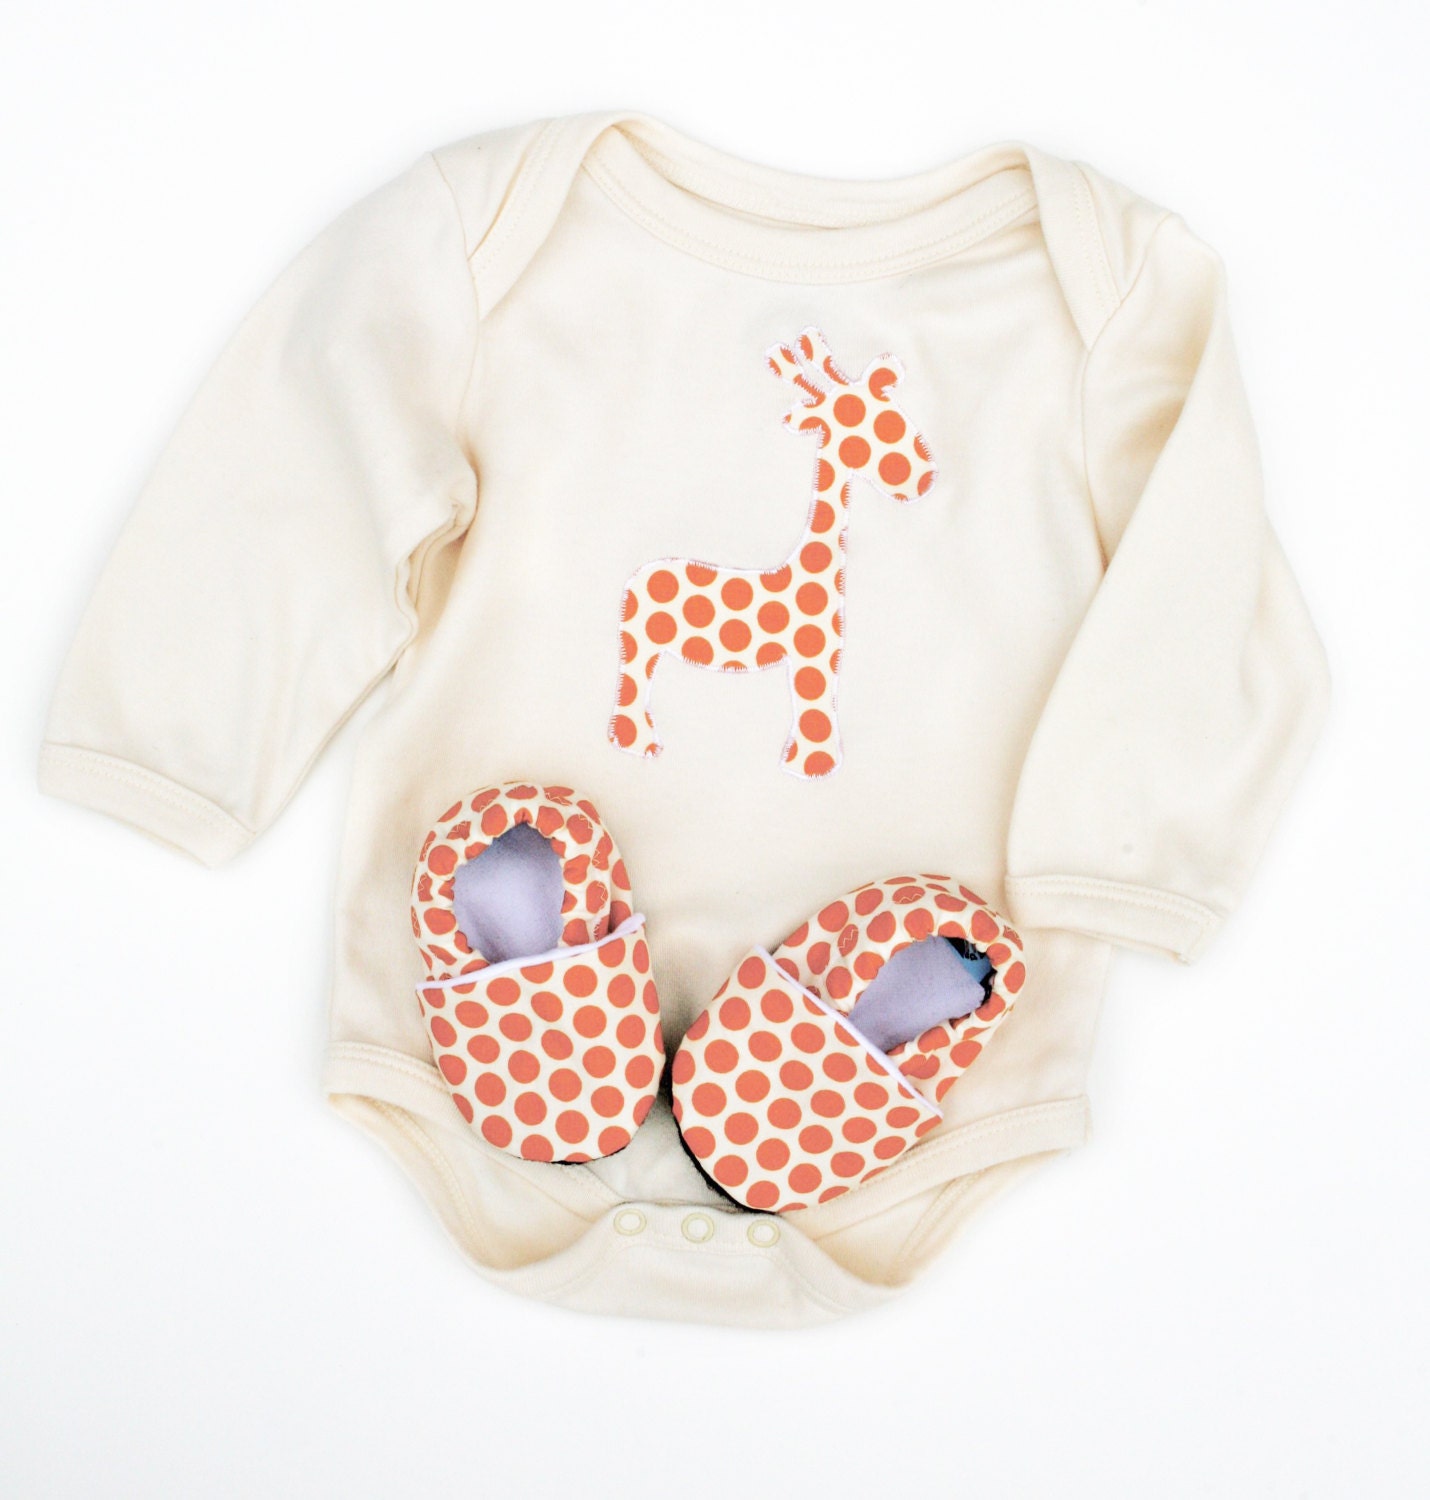 Giraffe Organic Bodysuit Short or Long Sleeve in Orange Spots with Handmade Organic Baby Shoes- Gift for  0 3  6 12 18 months- Baby Clothes